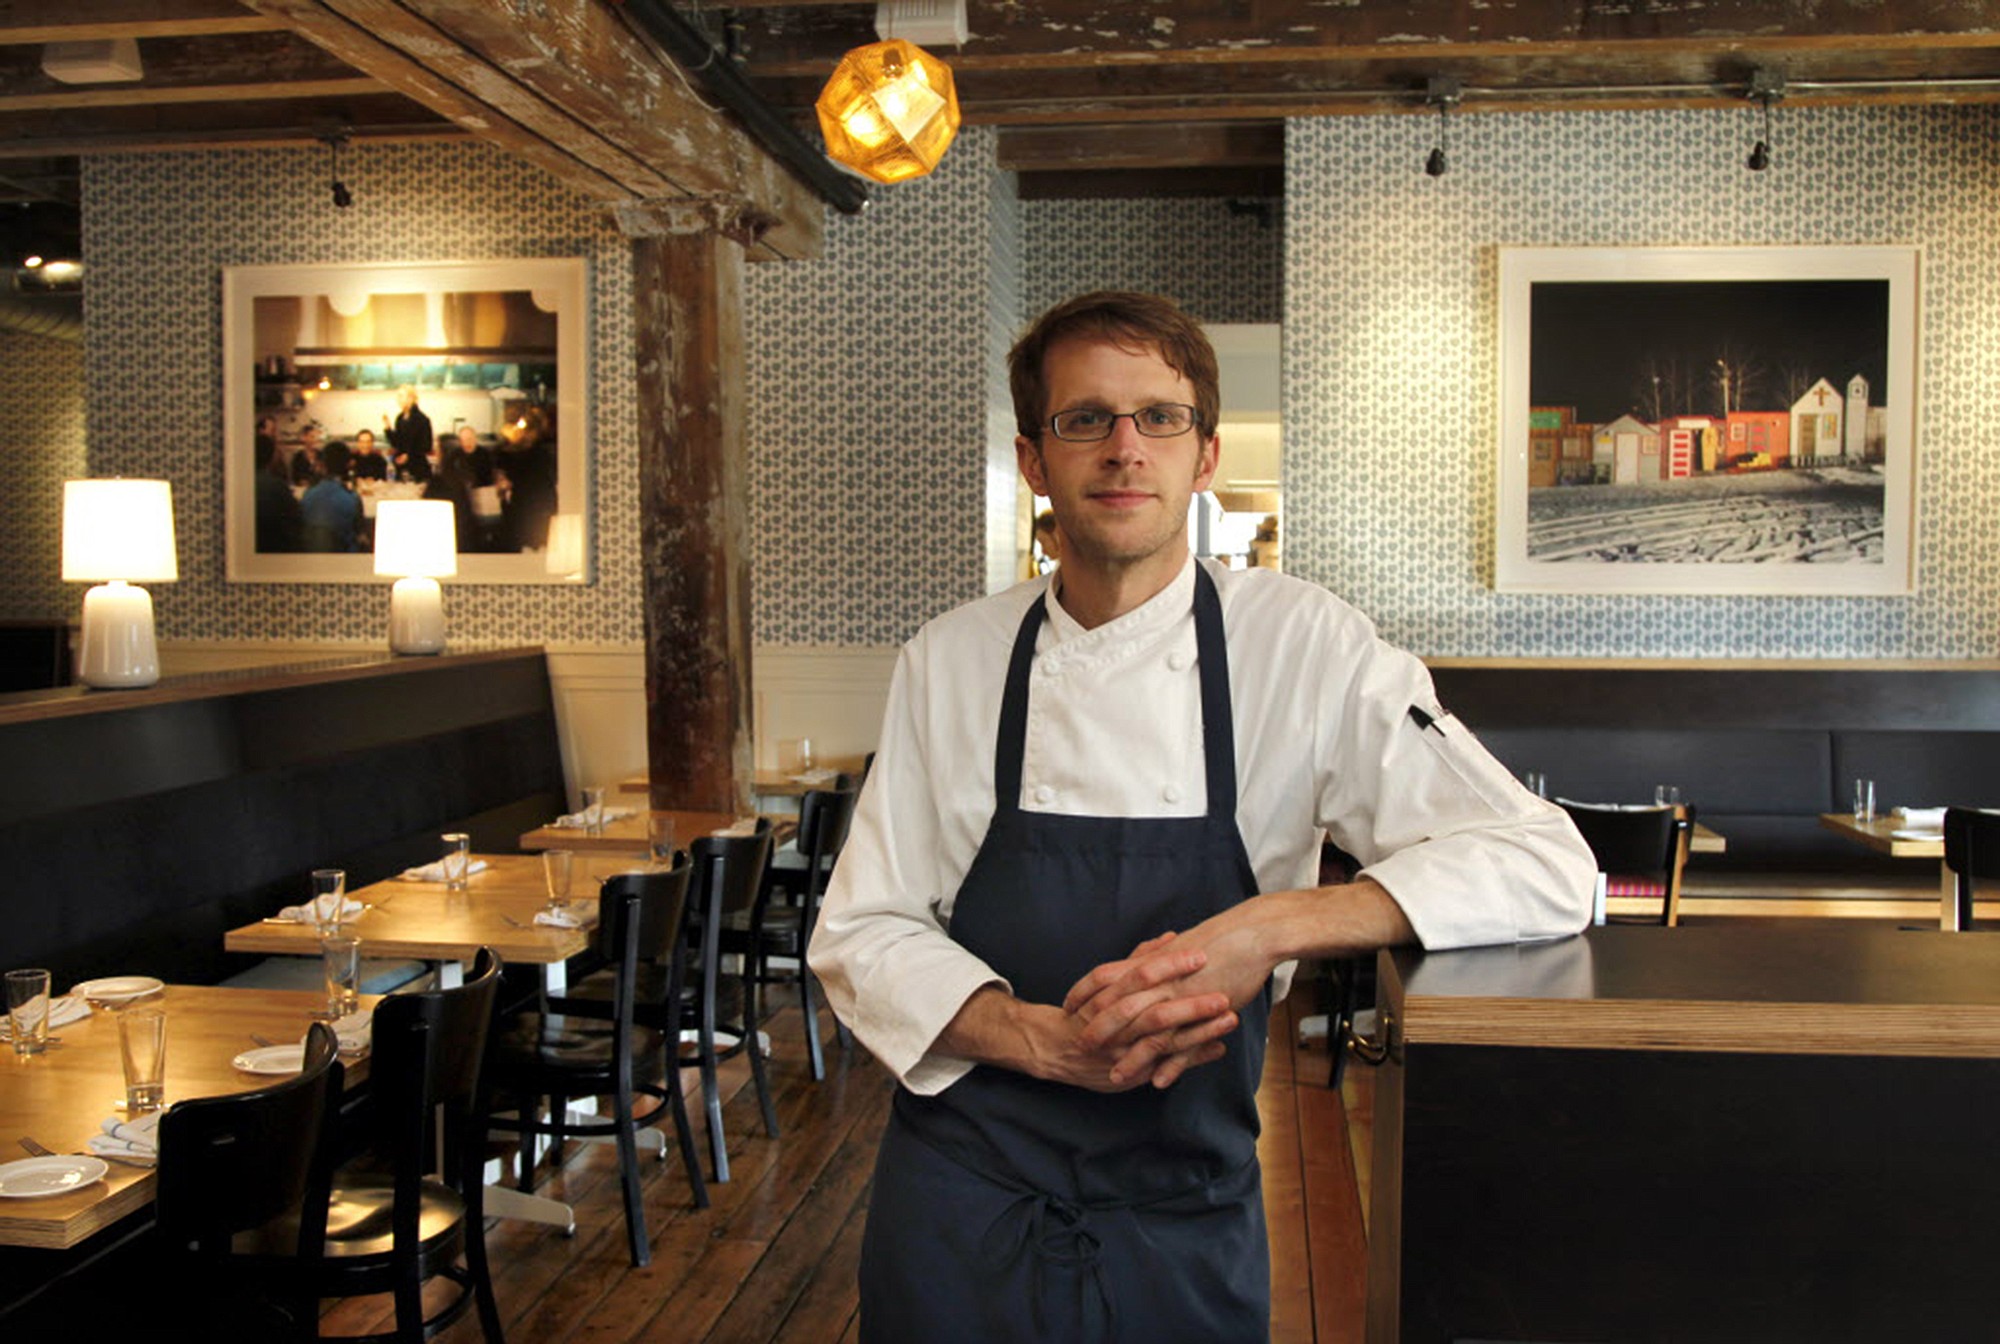 Chef Paul Berglund, in a 2011 file image, at the Bachelor Farmer restaurant in Minneapolis, grows two types of radishes.